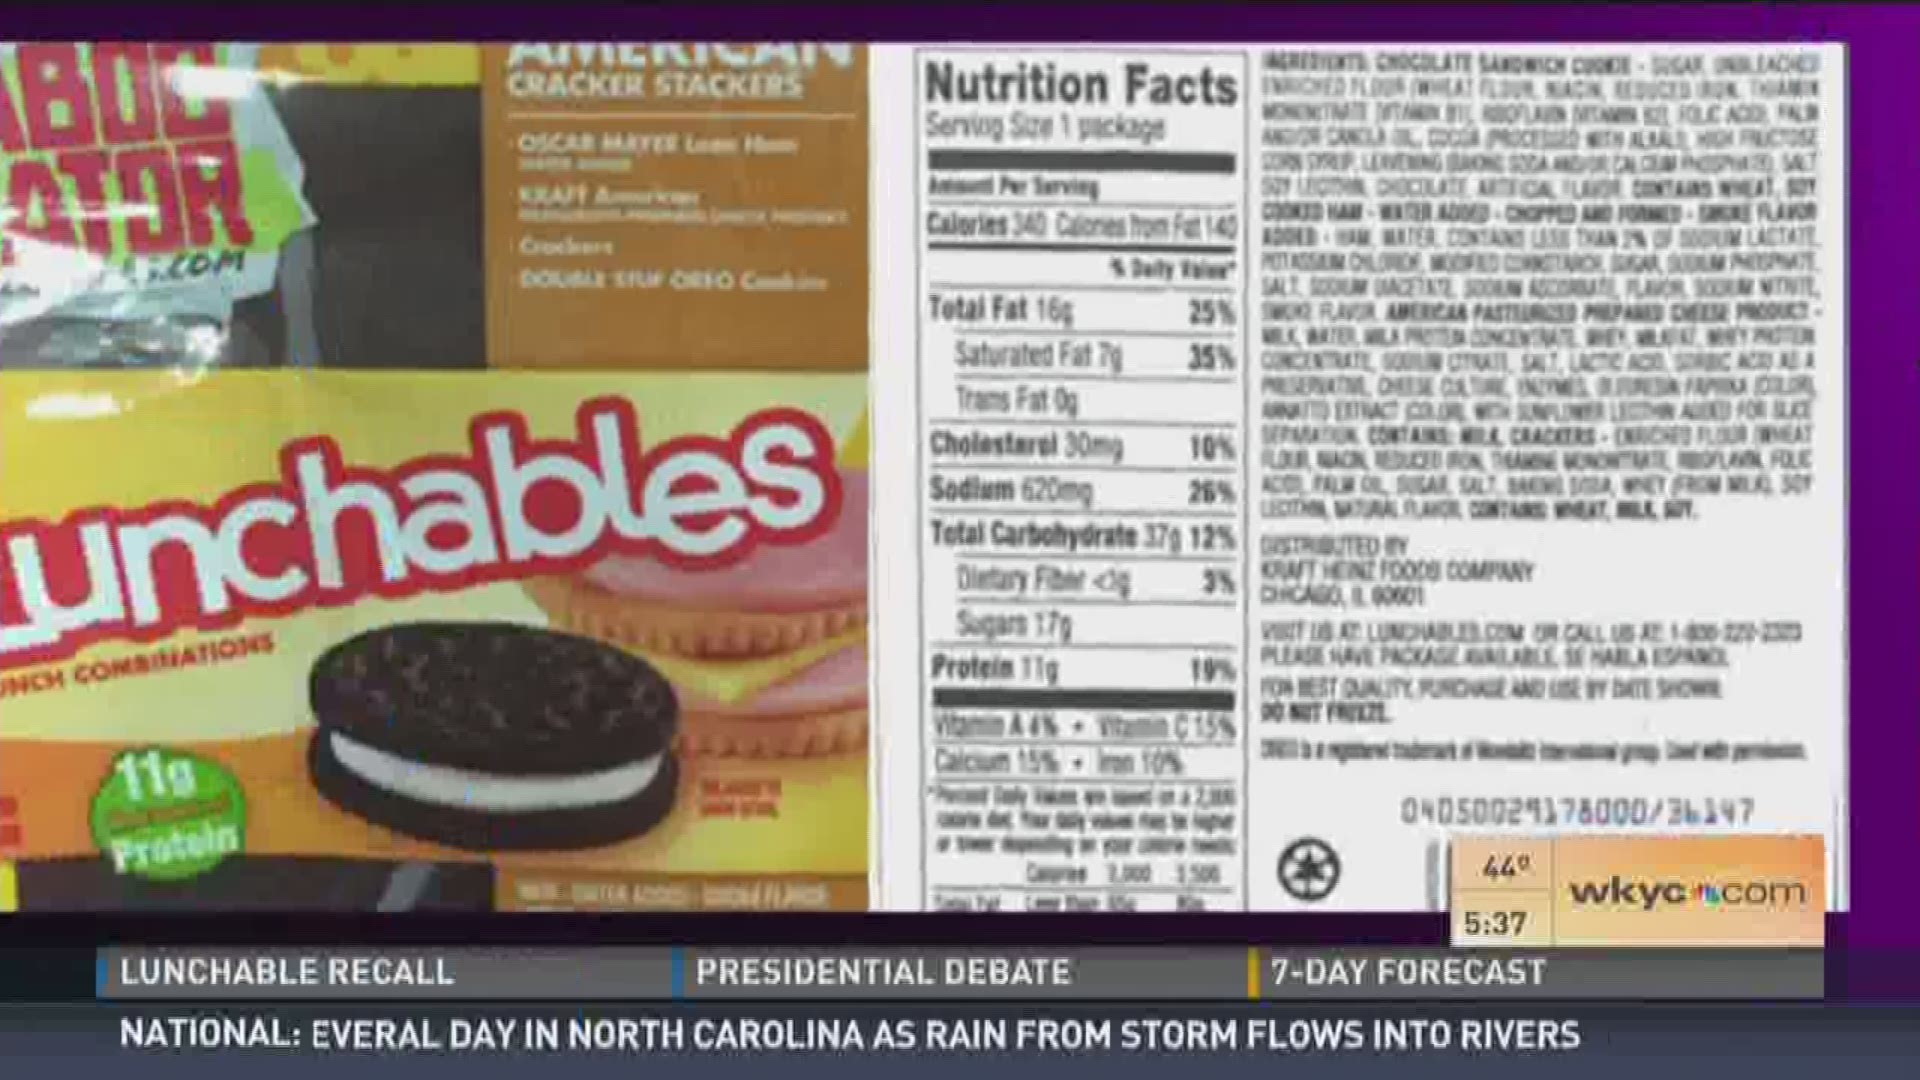 959 pounds of Lunchables are involved in the recall.